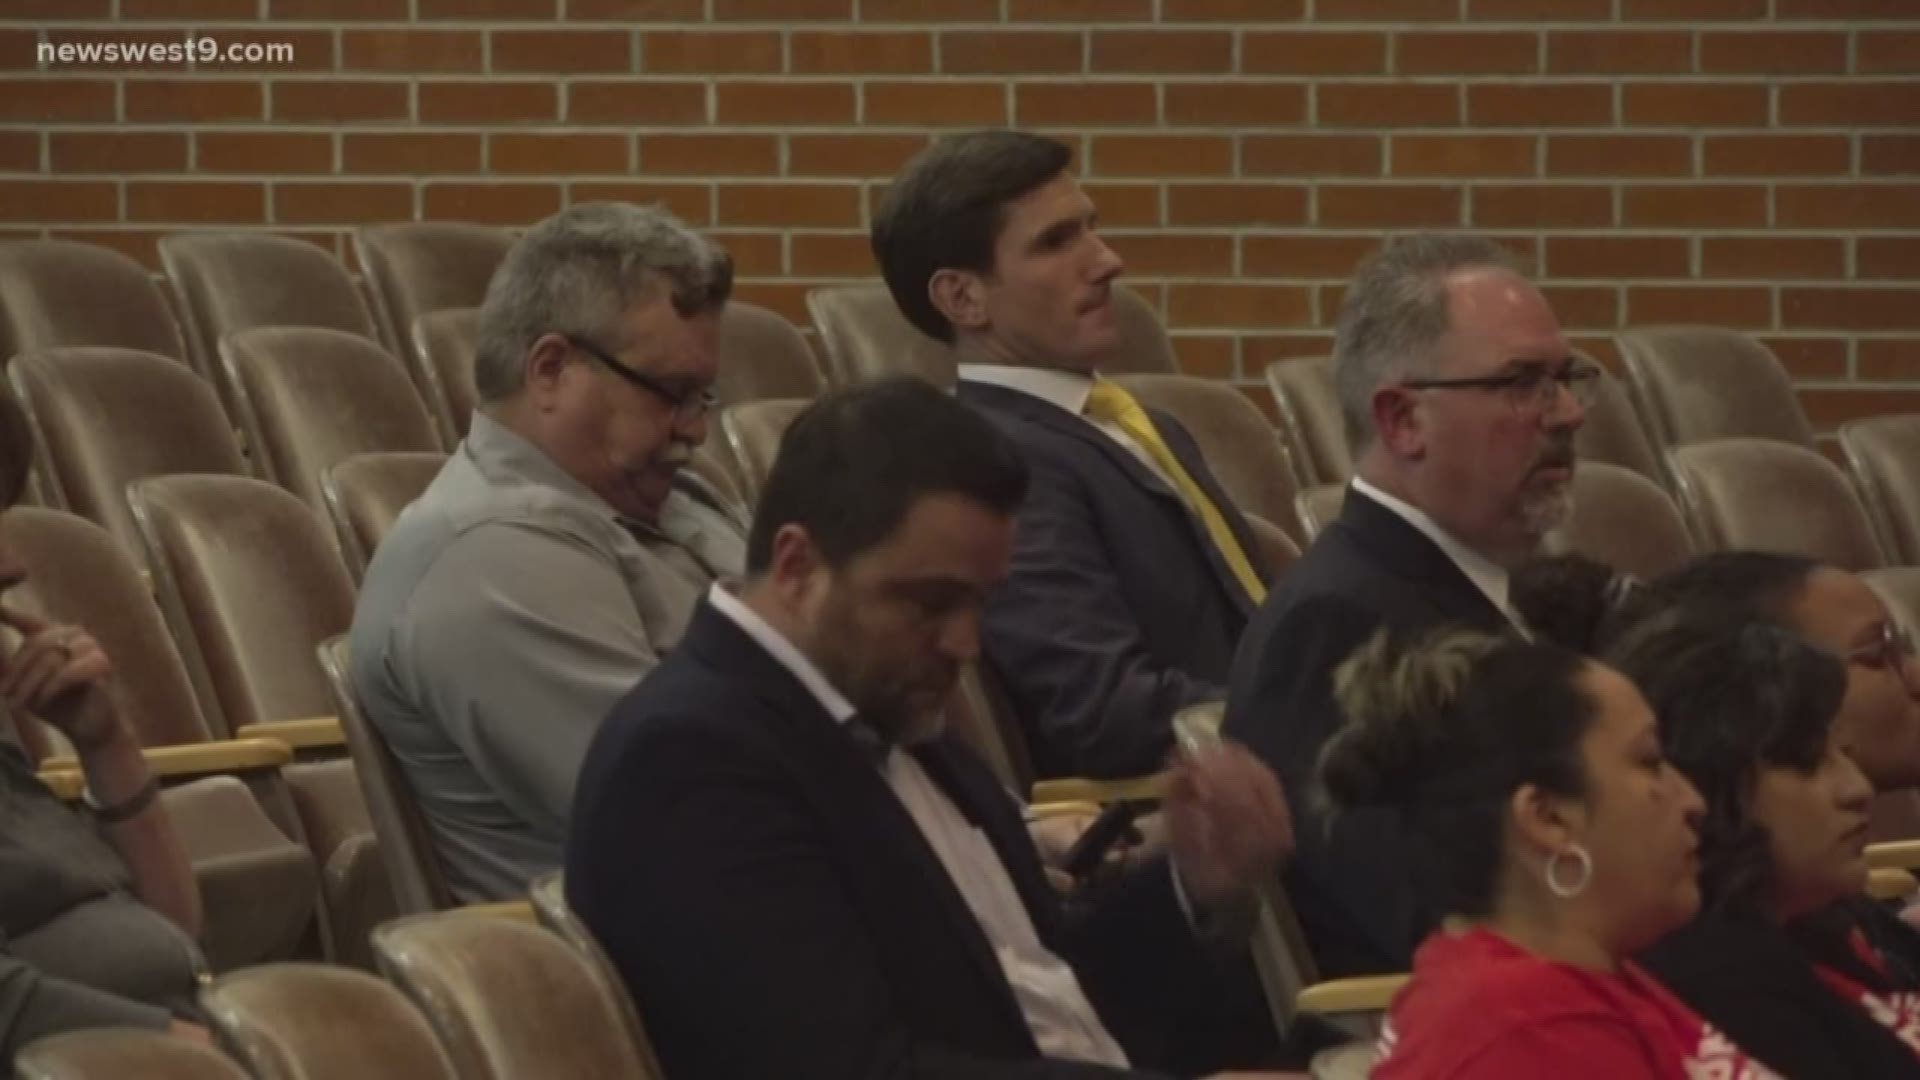 The hearing was held to focus on how to reduce mass shootings in the aftermath of the El Paso and Midland-Odessa shootings.